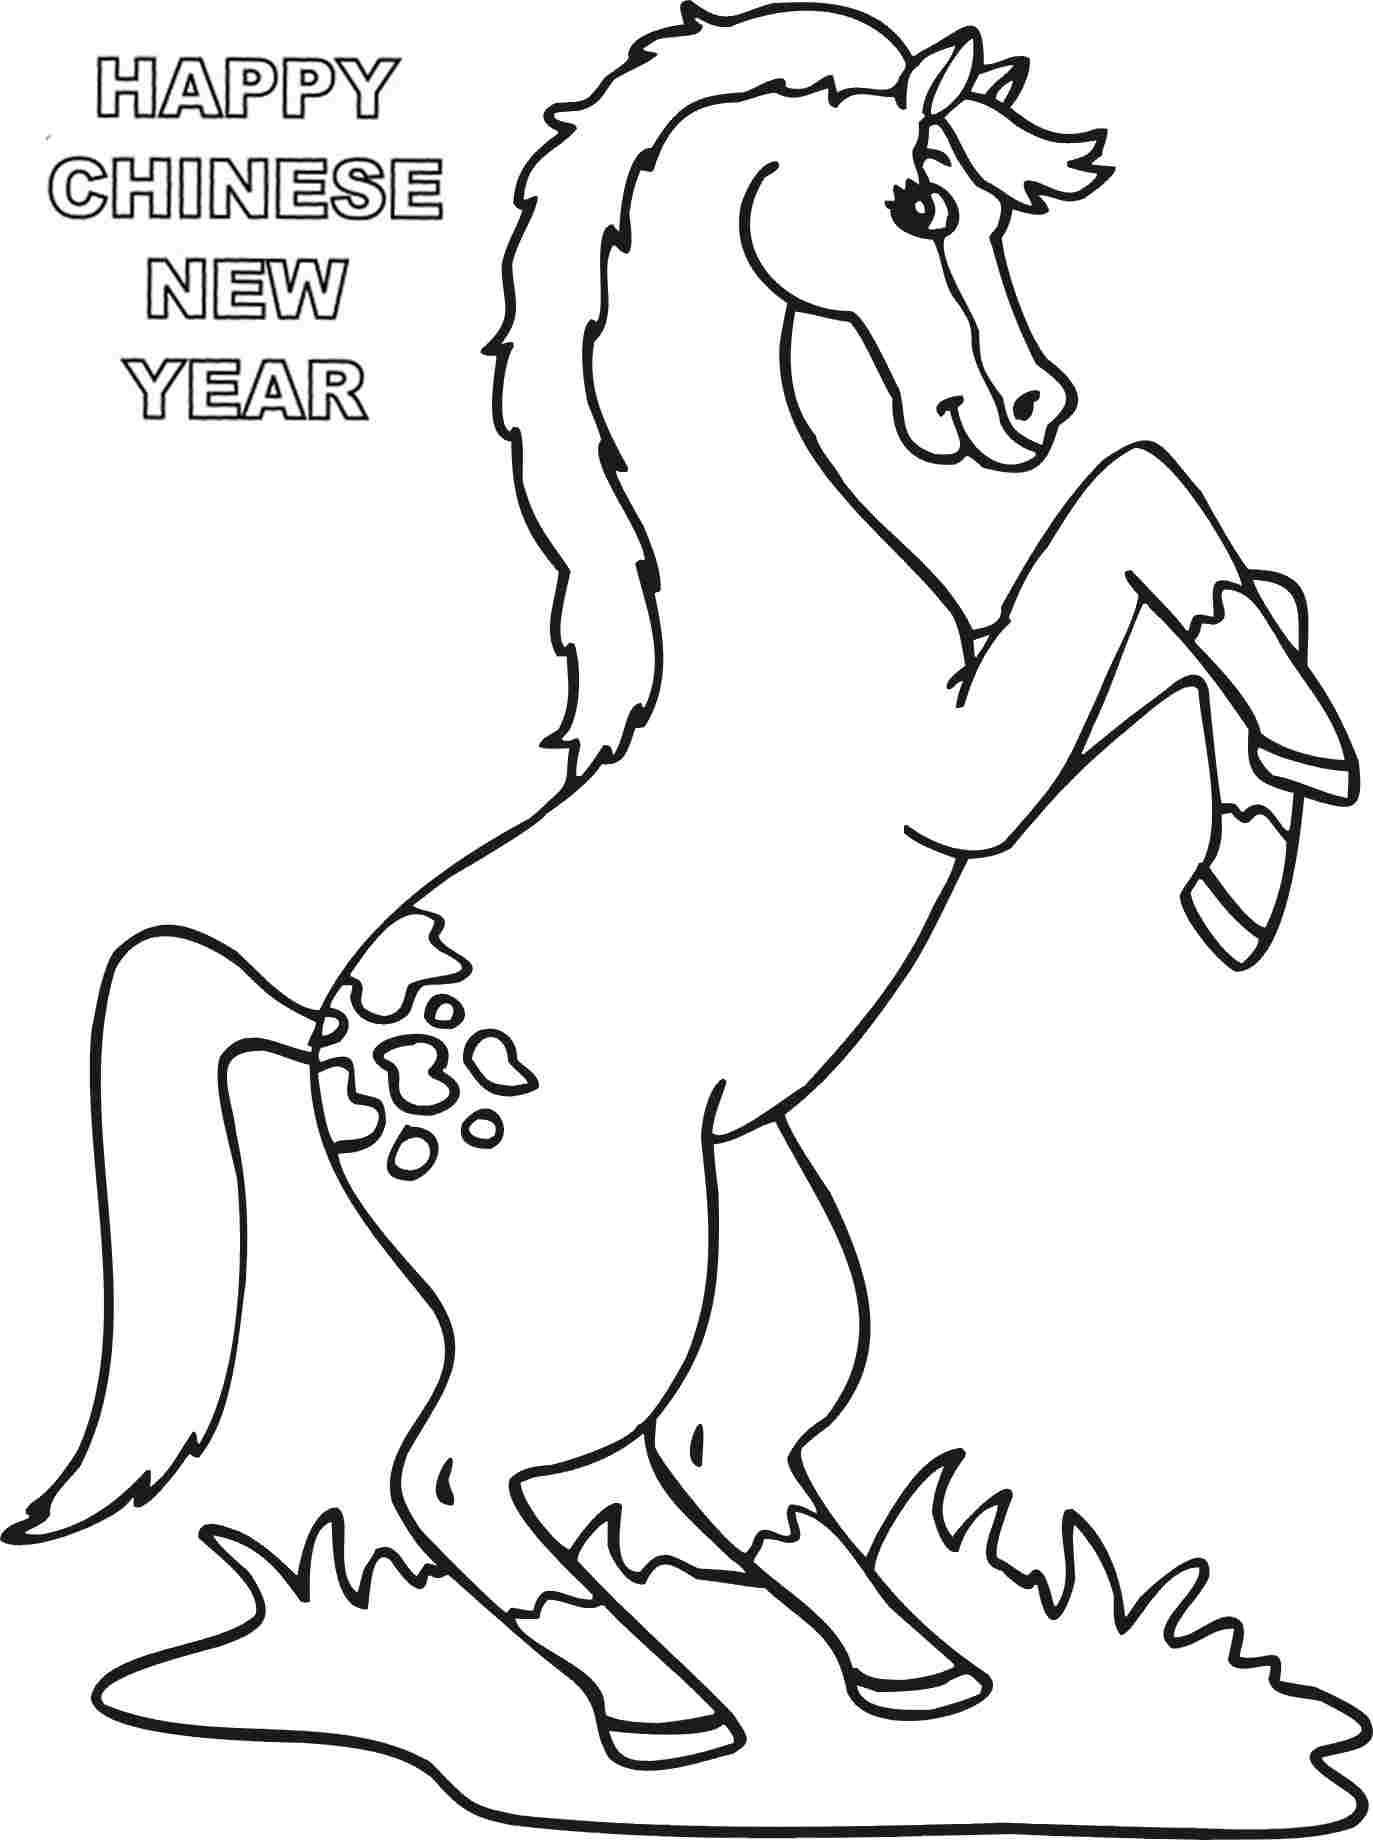 2014 Chinese New Year Coloring Pages Image